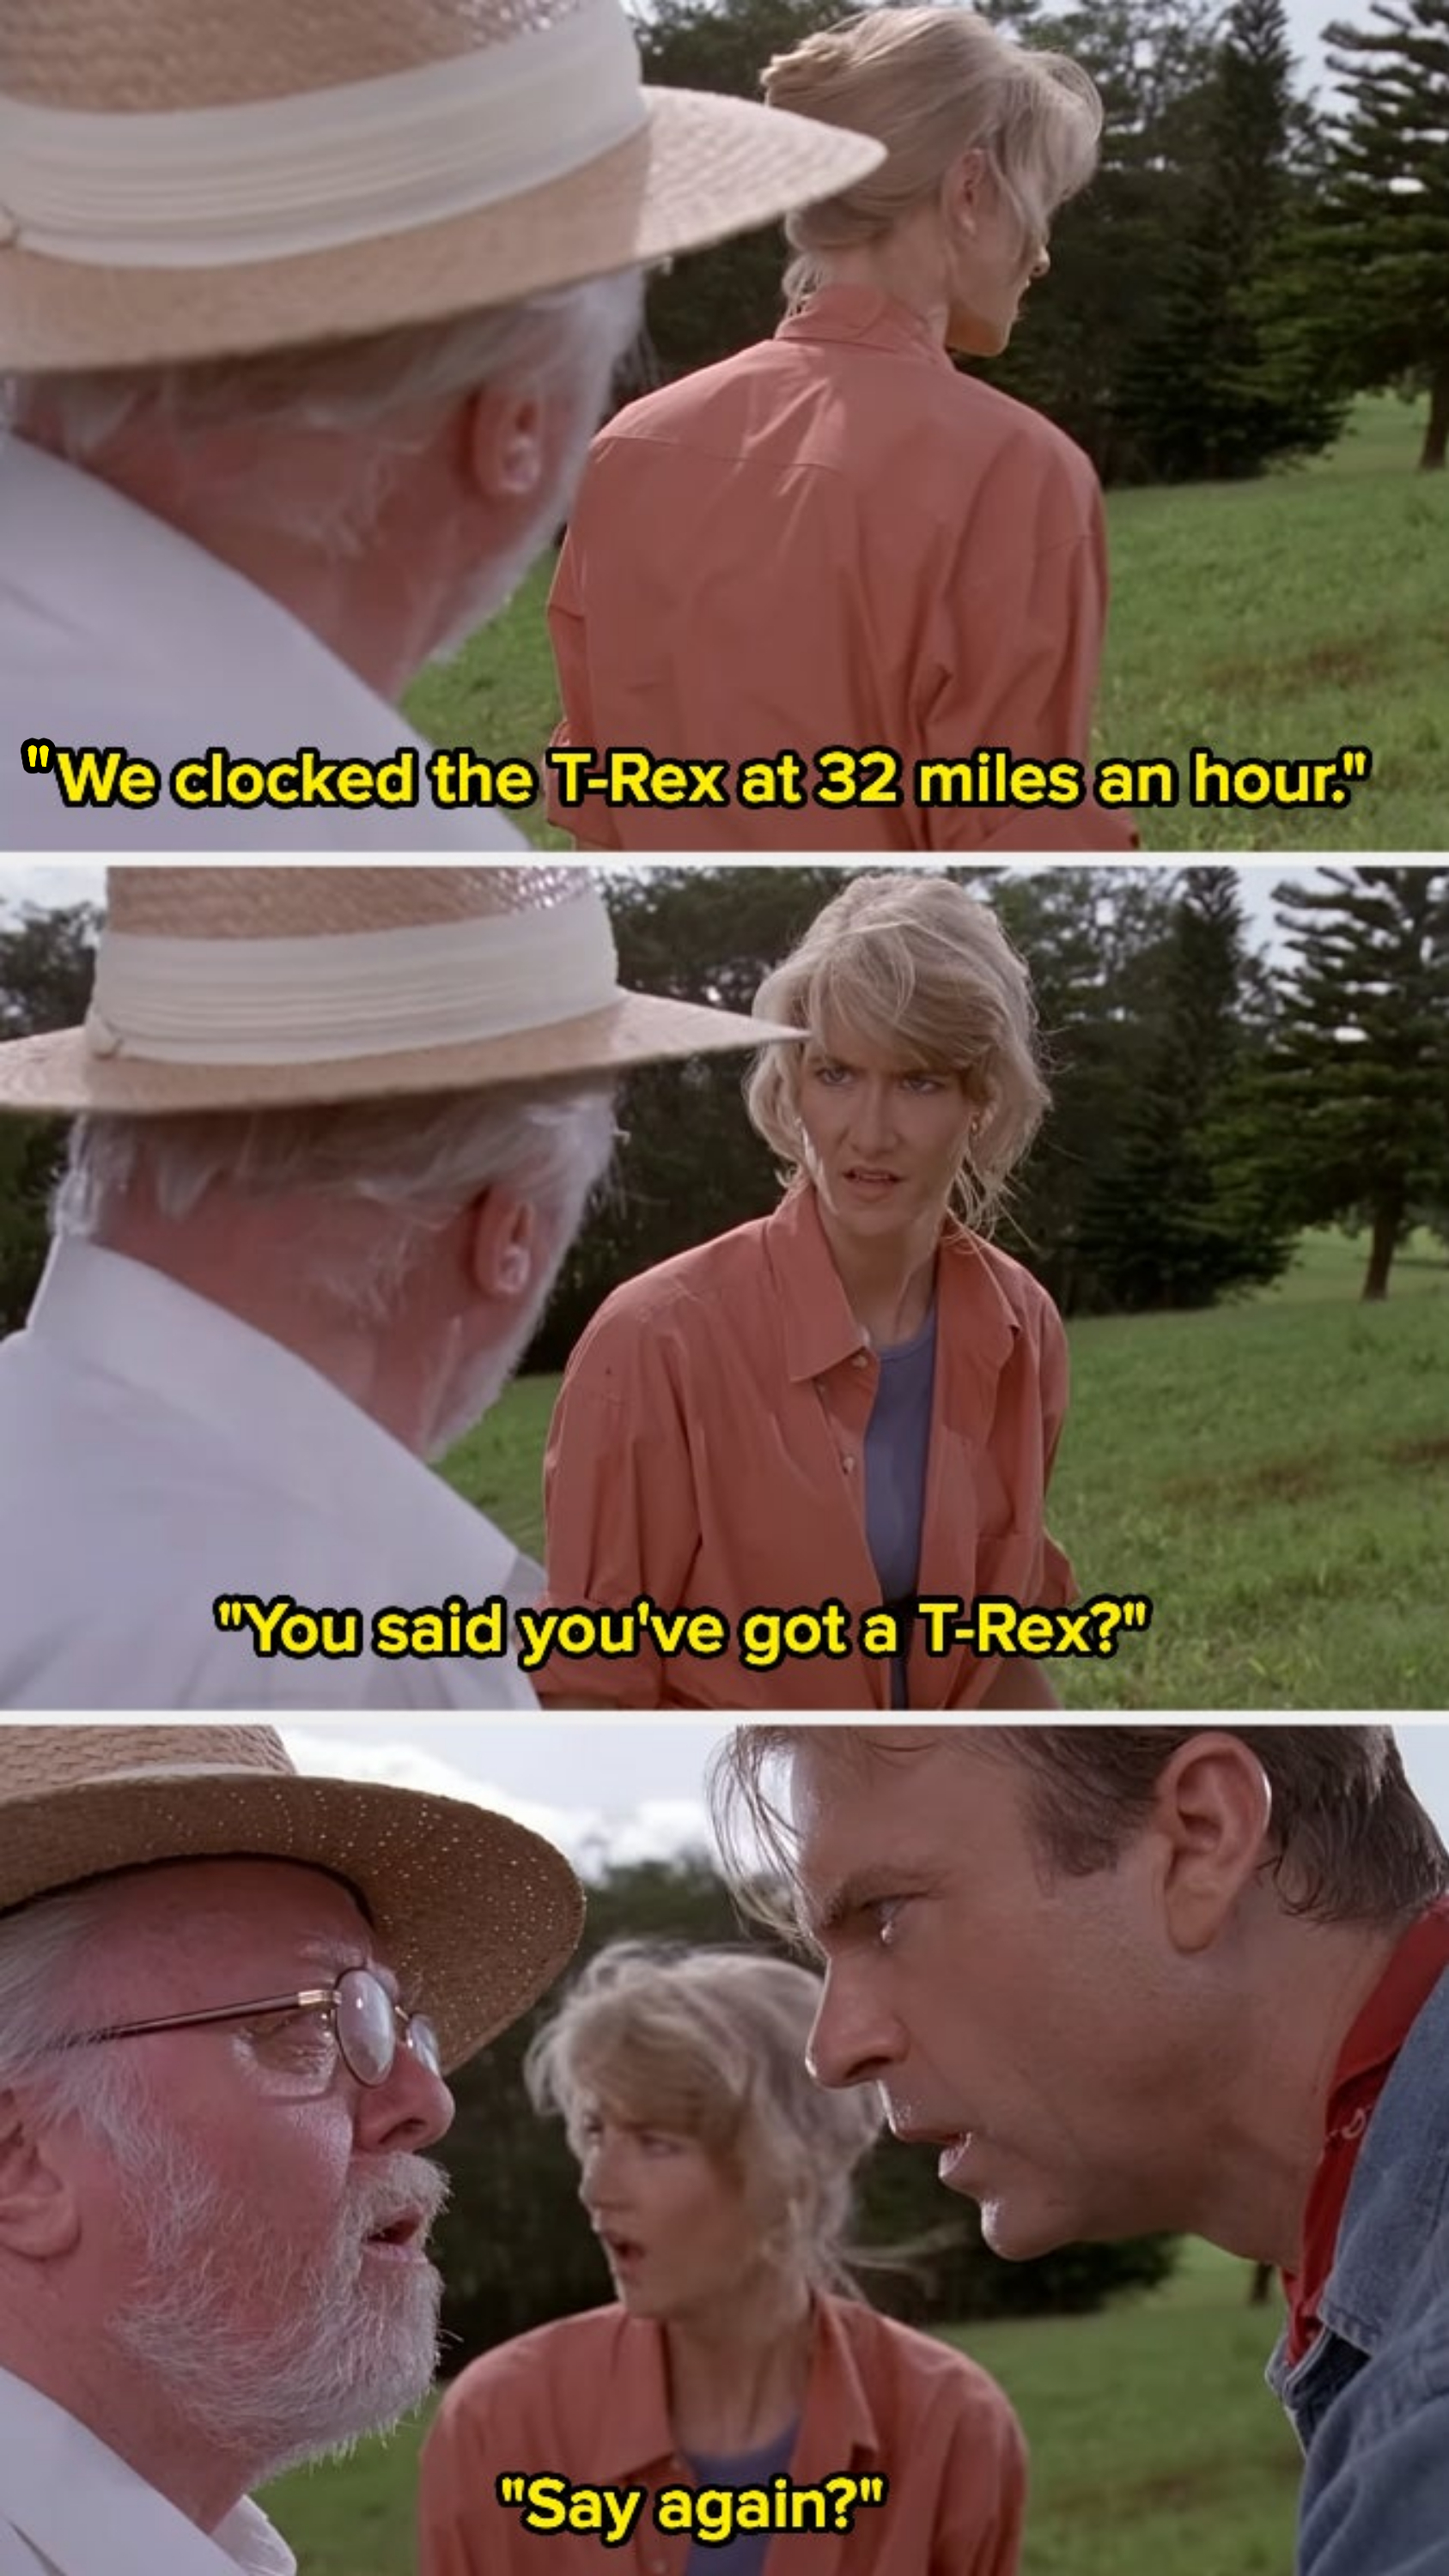 Character says they clocked a T rex at 32 mph, and another character says &quot;You said you&#x27;ve got a T rex?&quot;